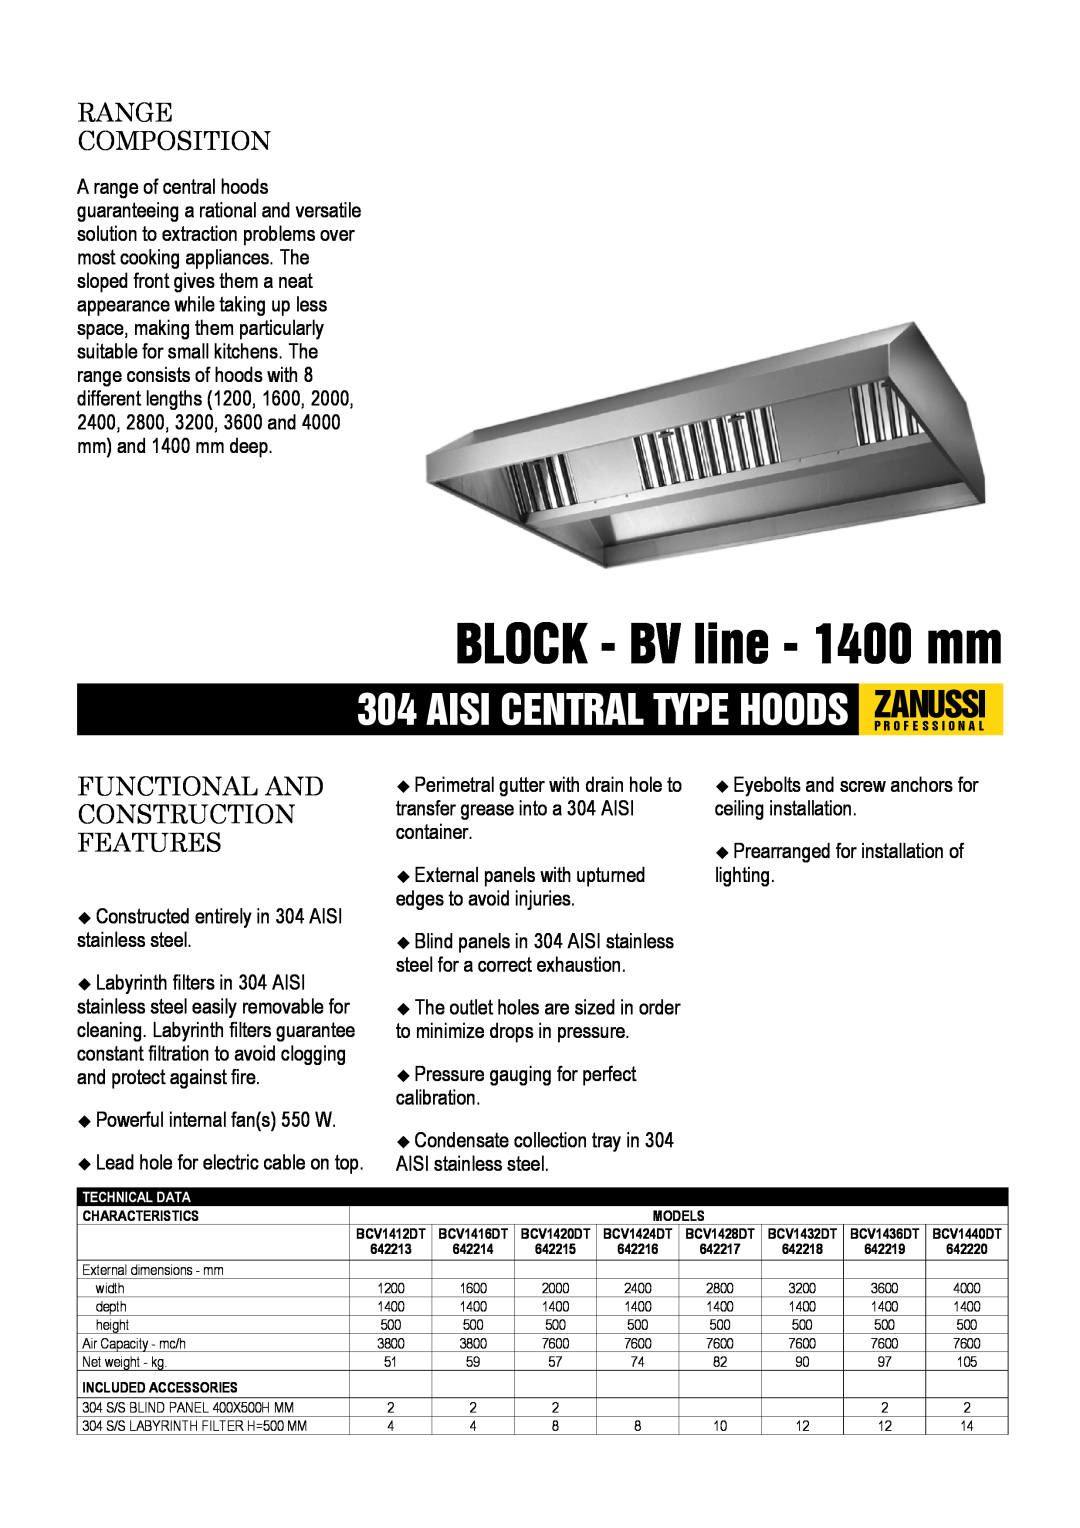 Zanussi 642214, 642219 dimensions BLOCK - BV line - 1400 mm, Range Composition, Functional And Construction Features 